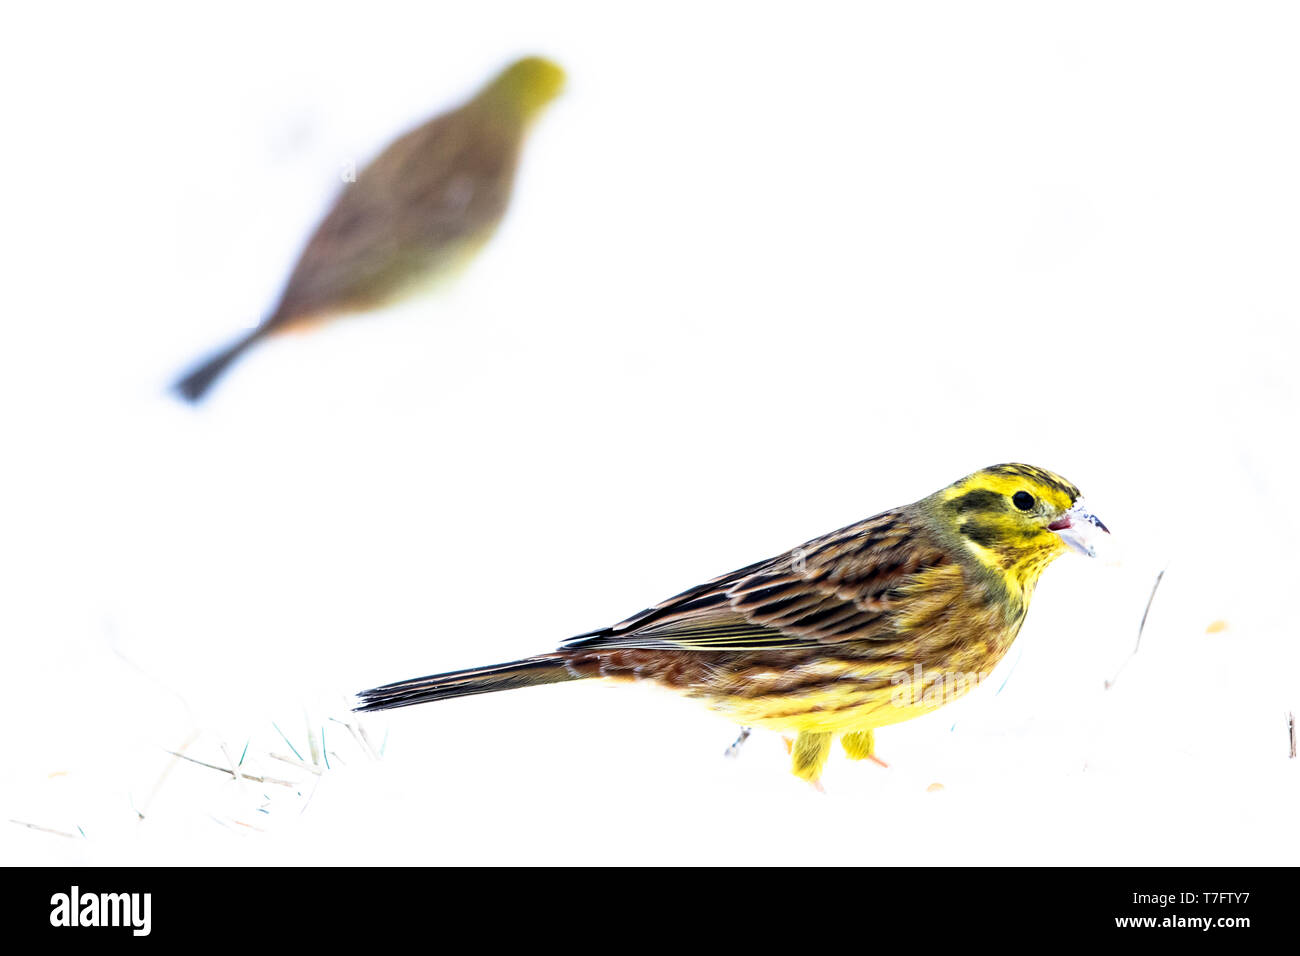 Yellowhammer (Emberiza citrinella) wintering in Bialowieza forest in Poland. One bird in foreground foraging on seeds. Stock Photo